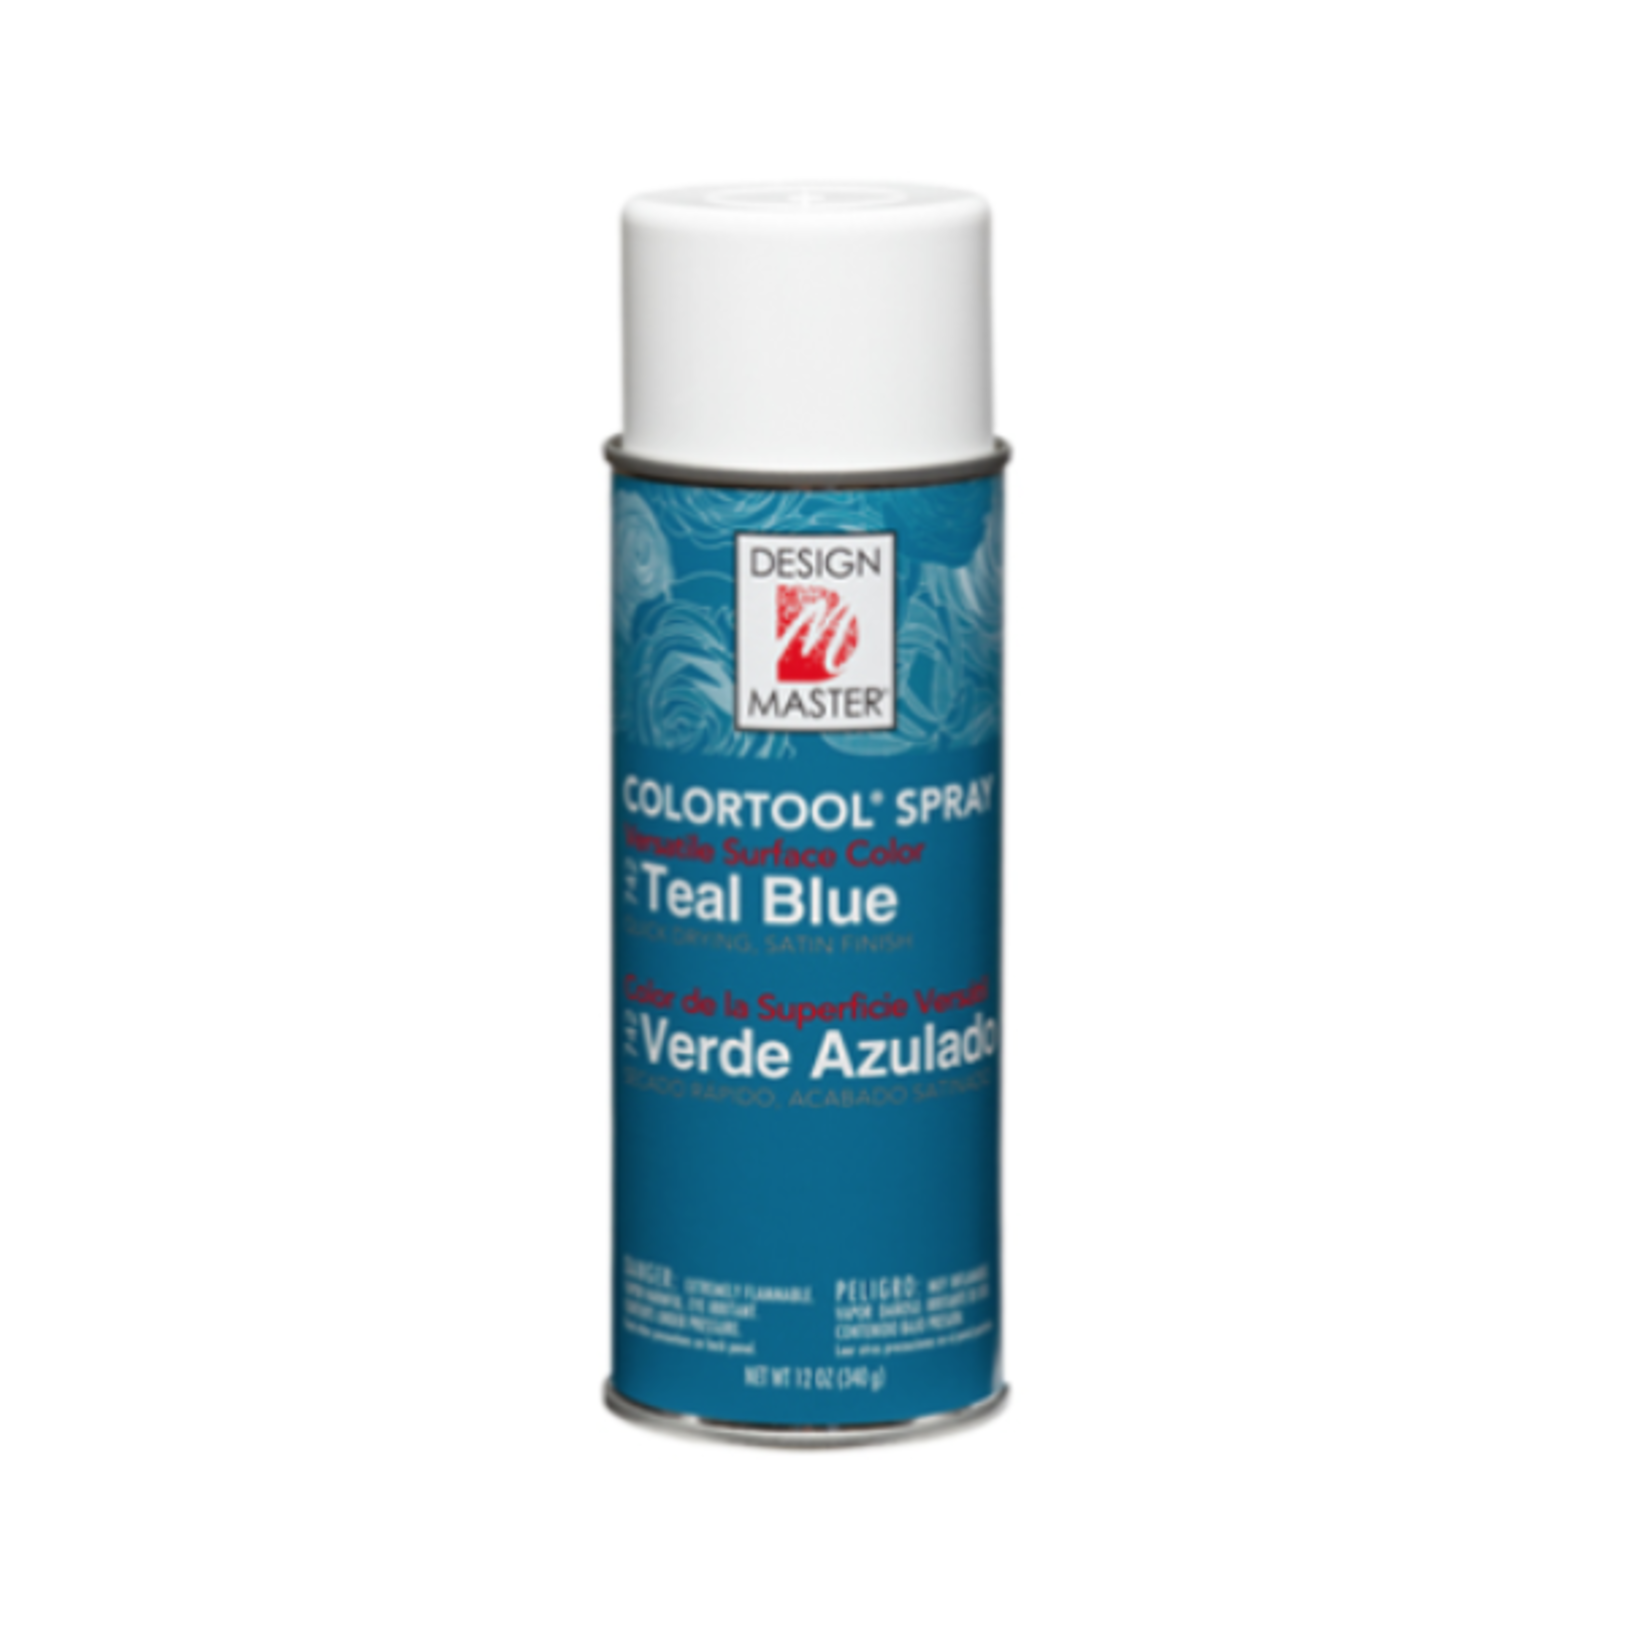 40% off was $14 now $8.39. 742 Colortool teal blue